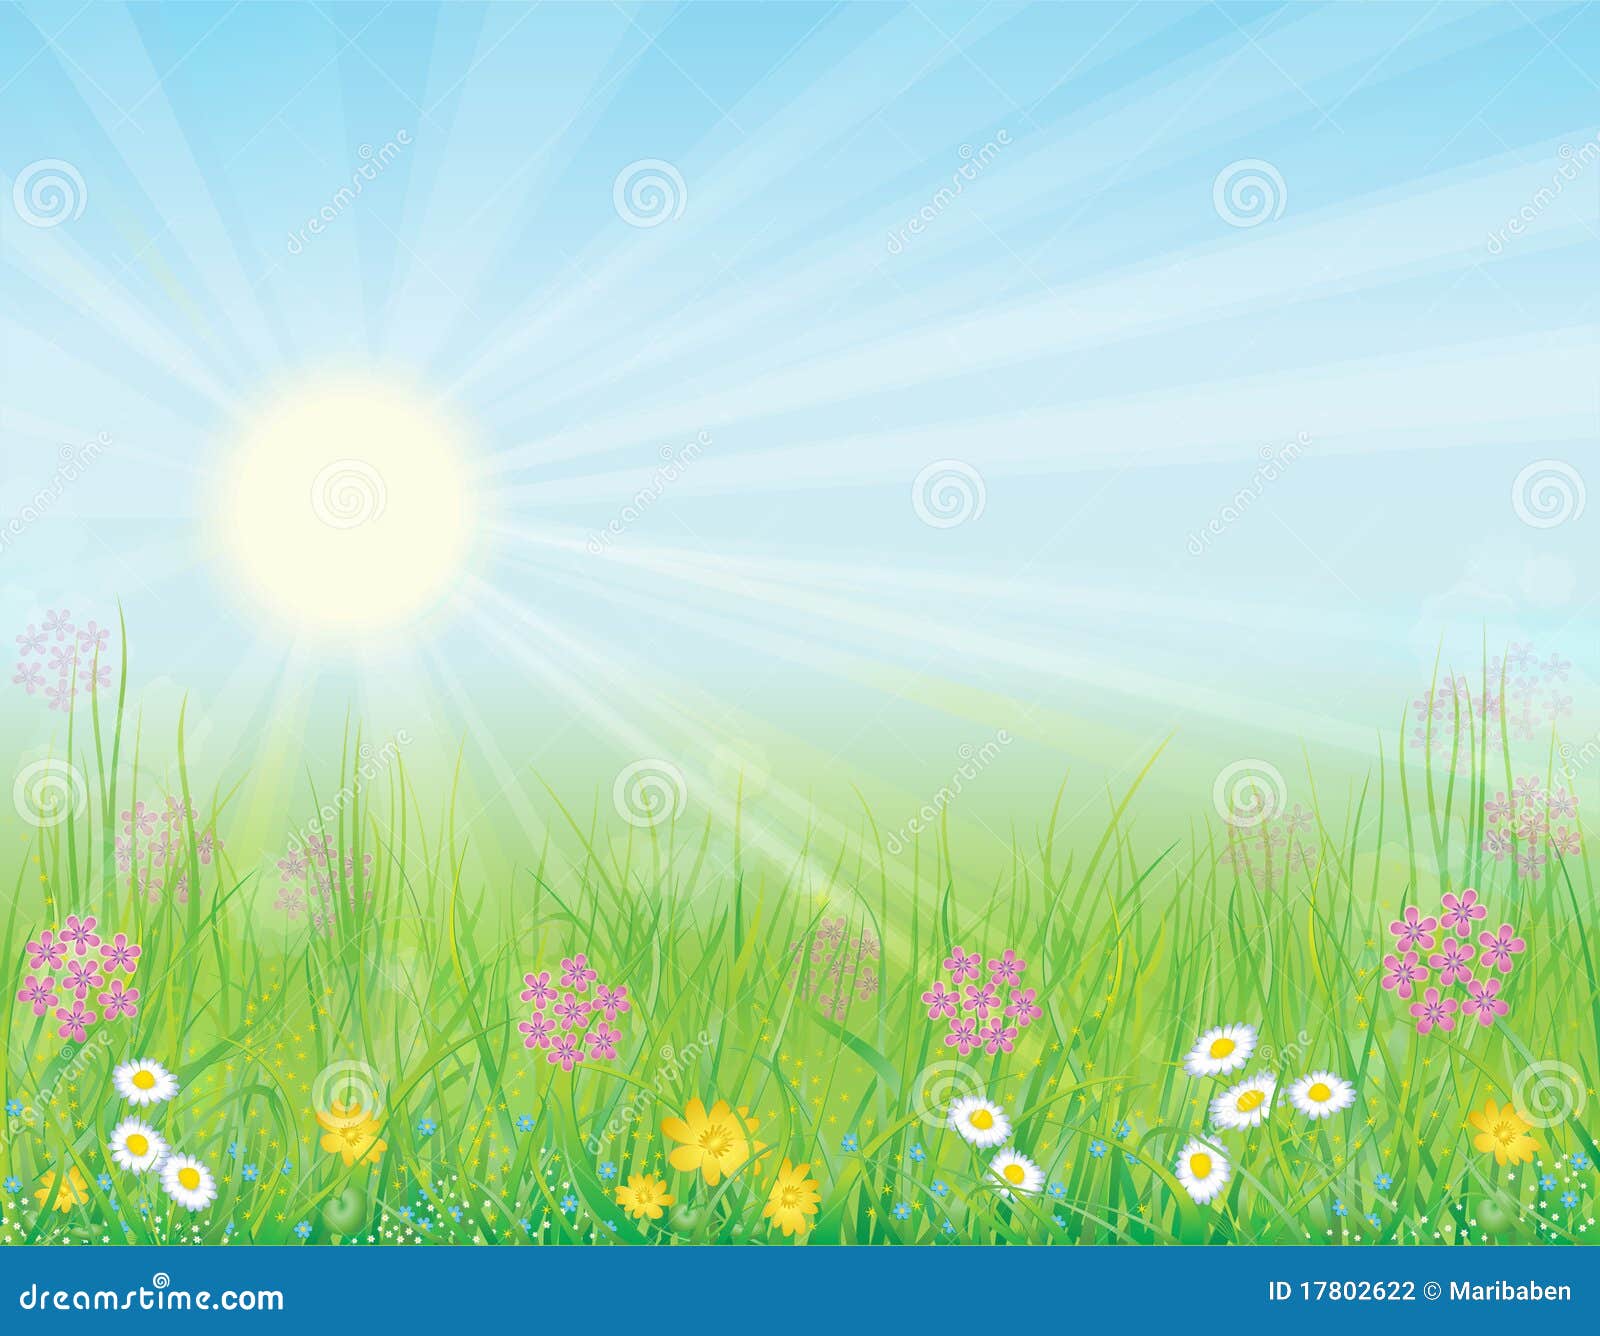 flower meadow clipart - photo #45